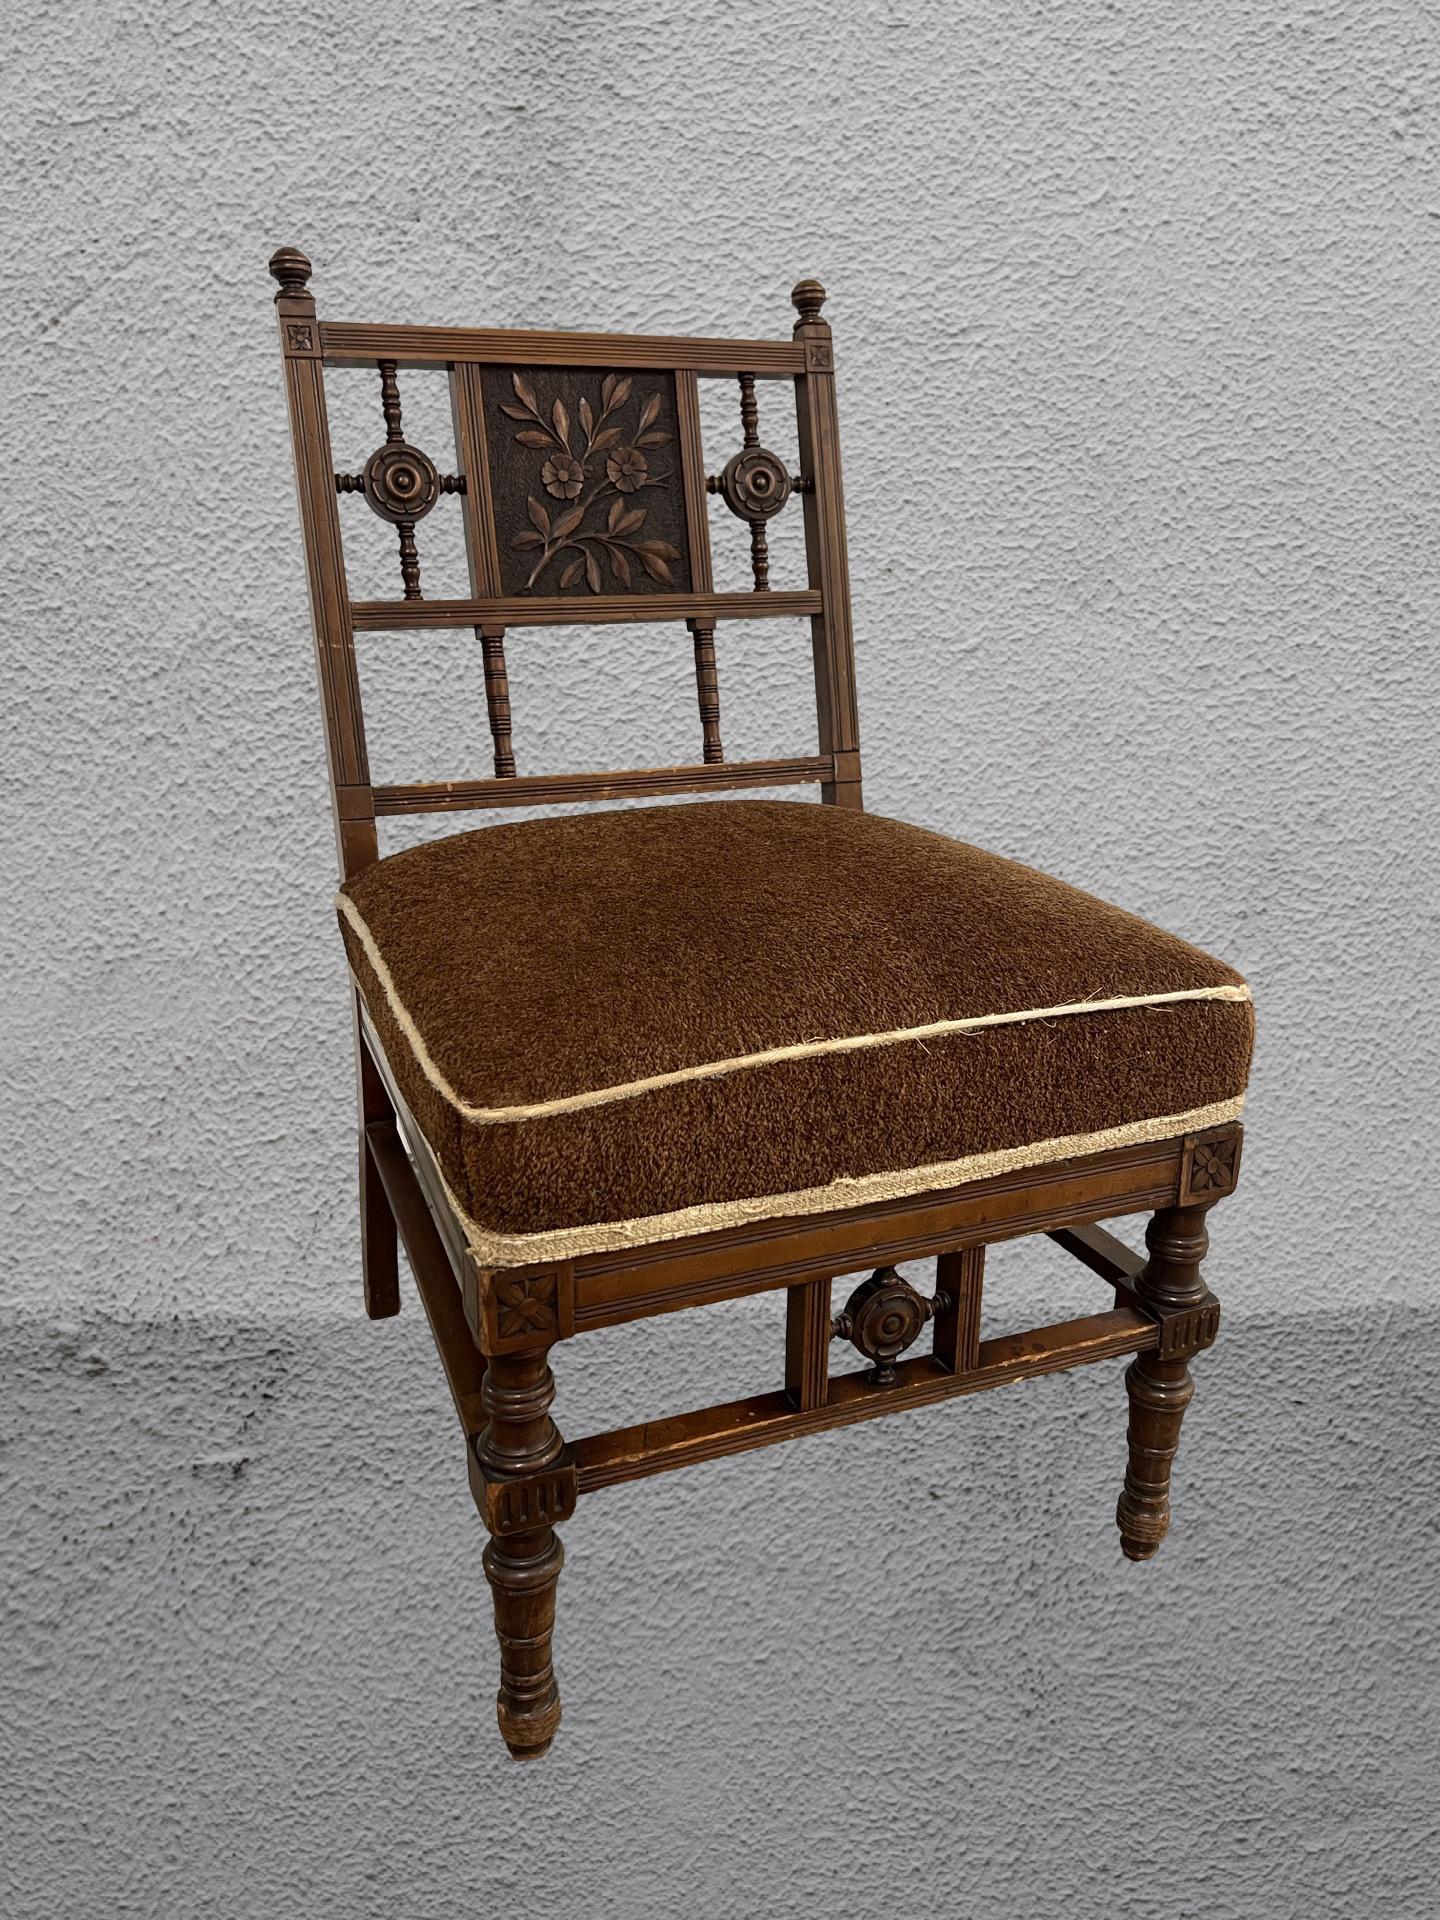 The firm of Herter Brothers, (working 1864–1906), was founded by German immigrants Gustave (1830–1898) and Christian Herter (1839–1883) in New York City.

An antique late 19th century American diminutive slipper chair, late 19th century, executed in